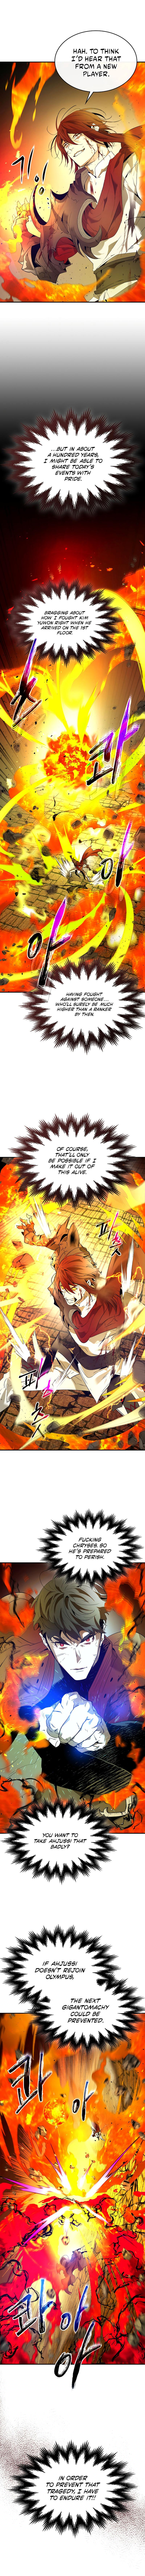 Leveling With The Gods Chapter 30, Leveling With The Gods 30, Read Leveling With The Gods Chapter 30, Leveling With The Gods Chapter 30 Manga, Leveling With The Gods Chapter 30 english, Leveling With The Gods Chapter 30 raw manga, Leveling With The Gods Chapter 30 online, Leveling With The Gods Chapter 30 high quality, Leveling With The Gods 30 chapter, Leveling With The Gods Chapter 30 manga scan